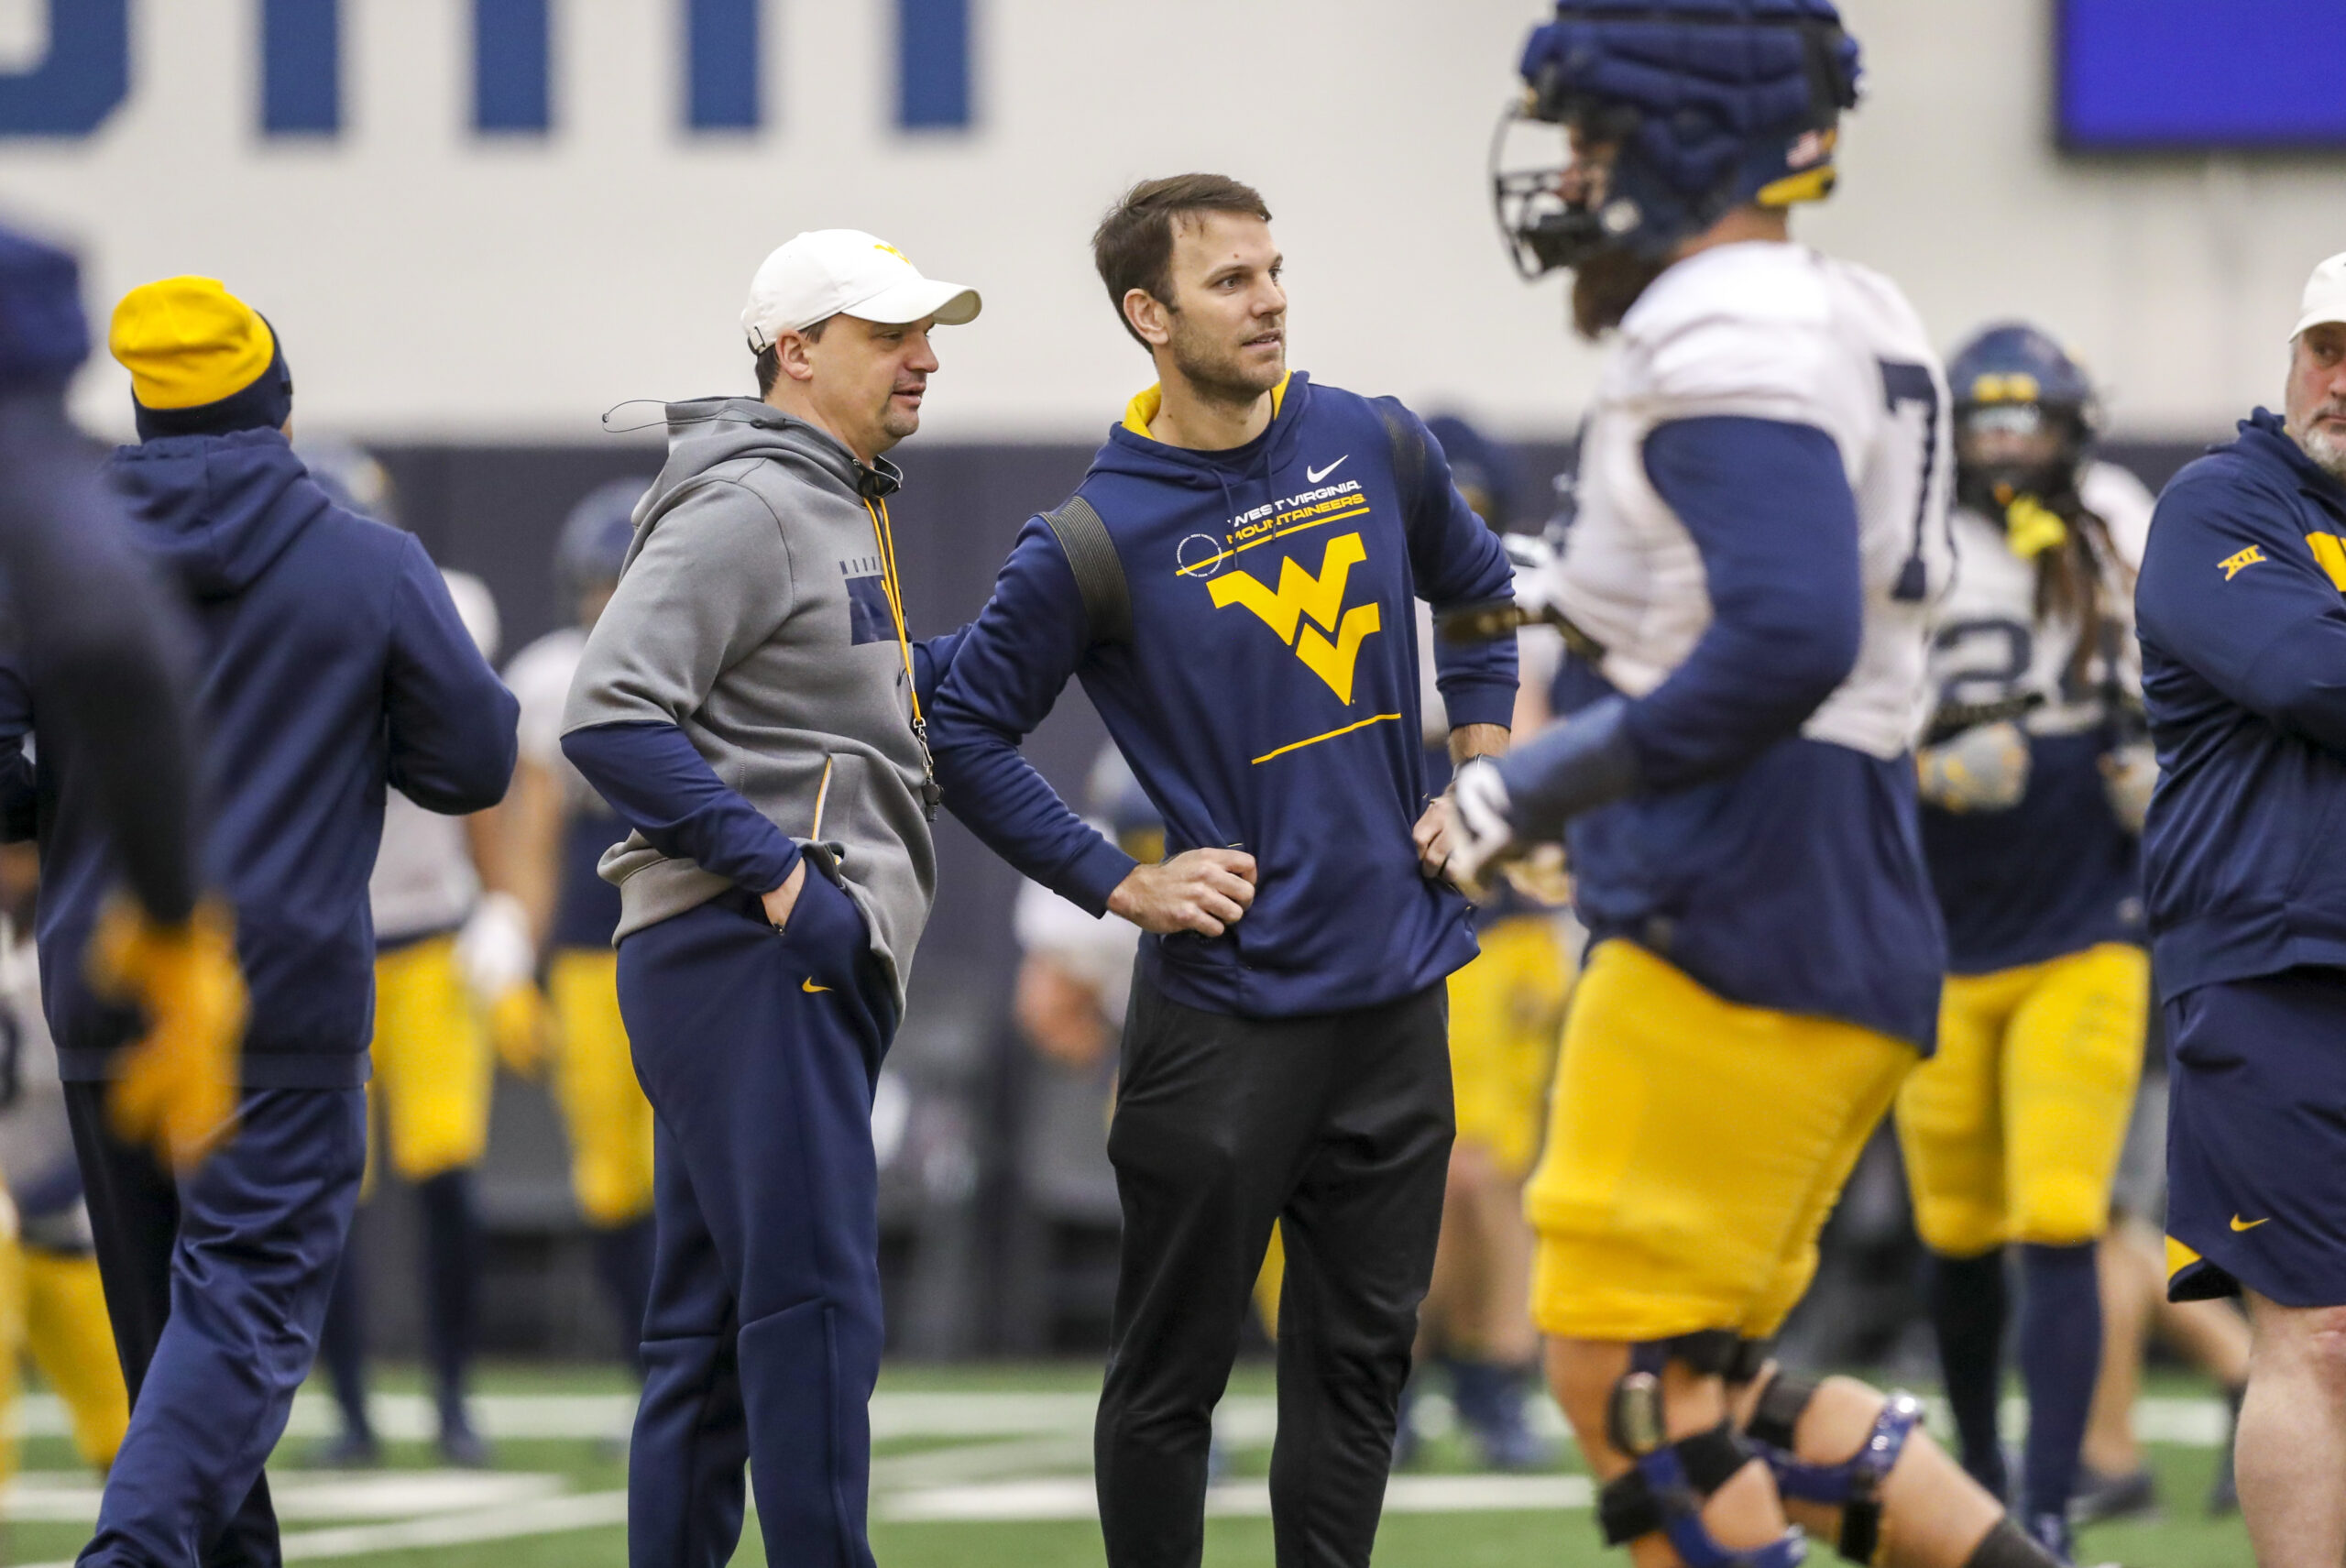 With Harrell in charge of offense, Brown has prepped for different challenges during game - WV MetroNews